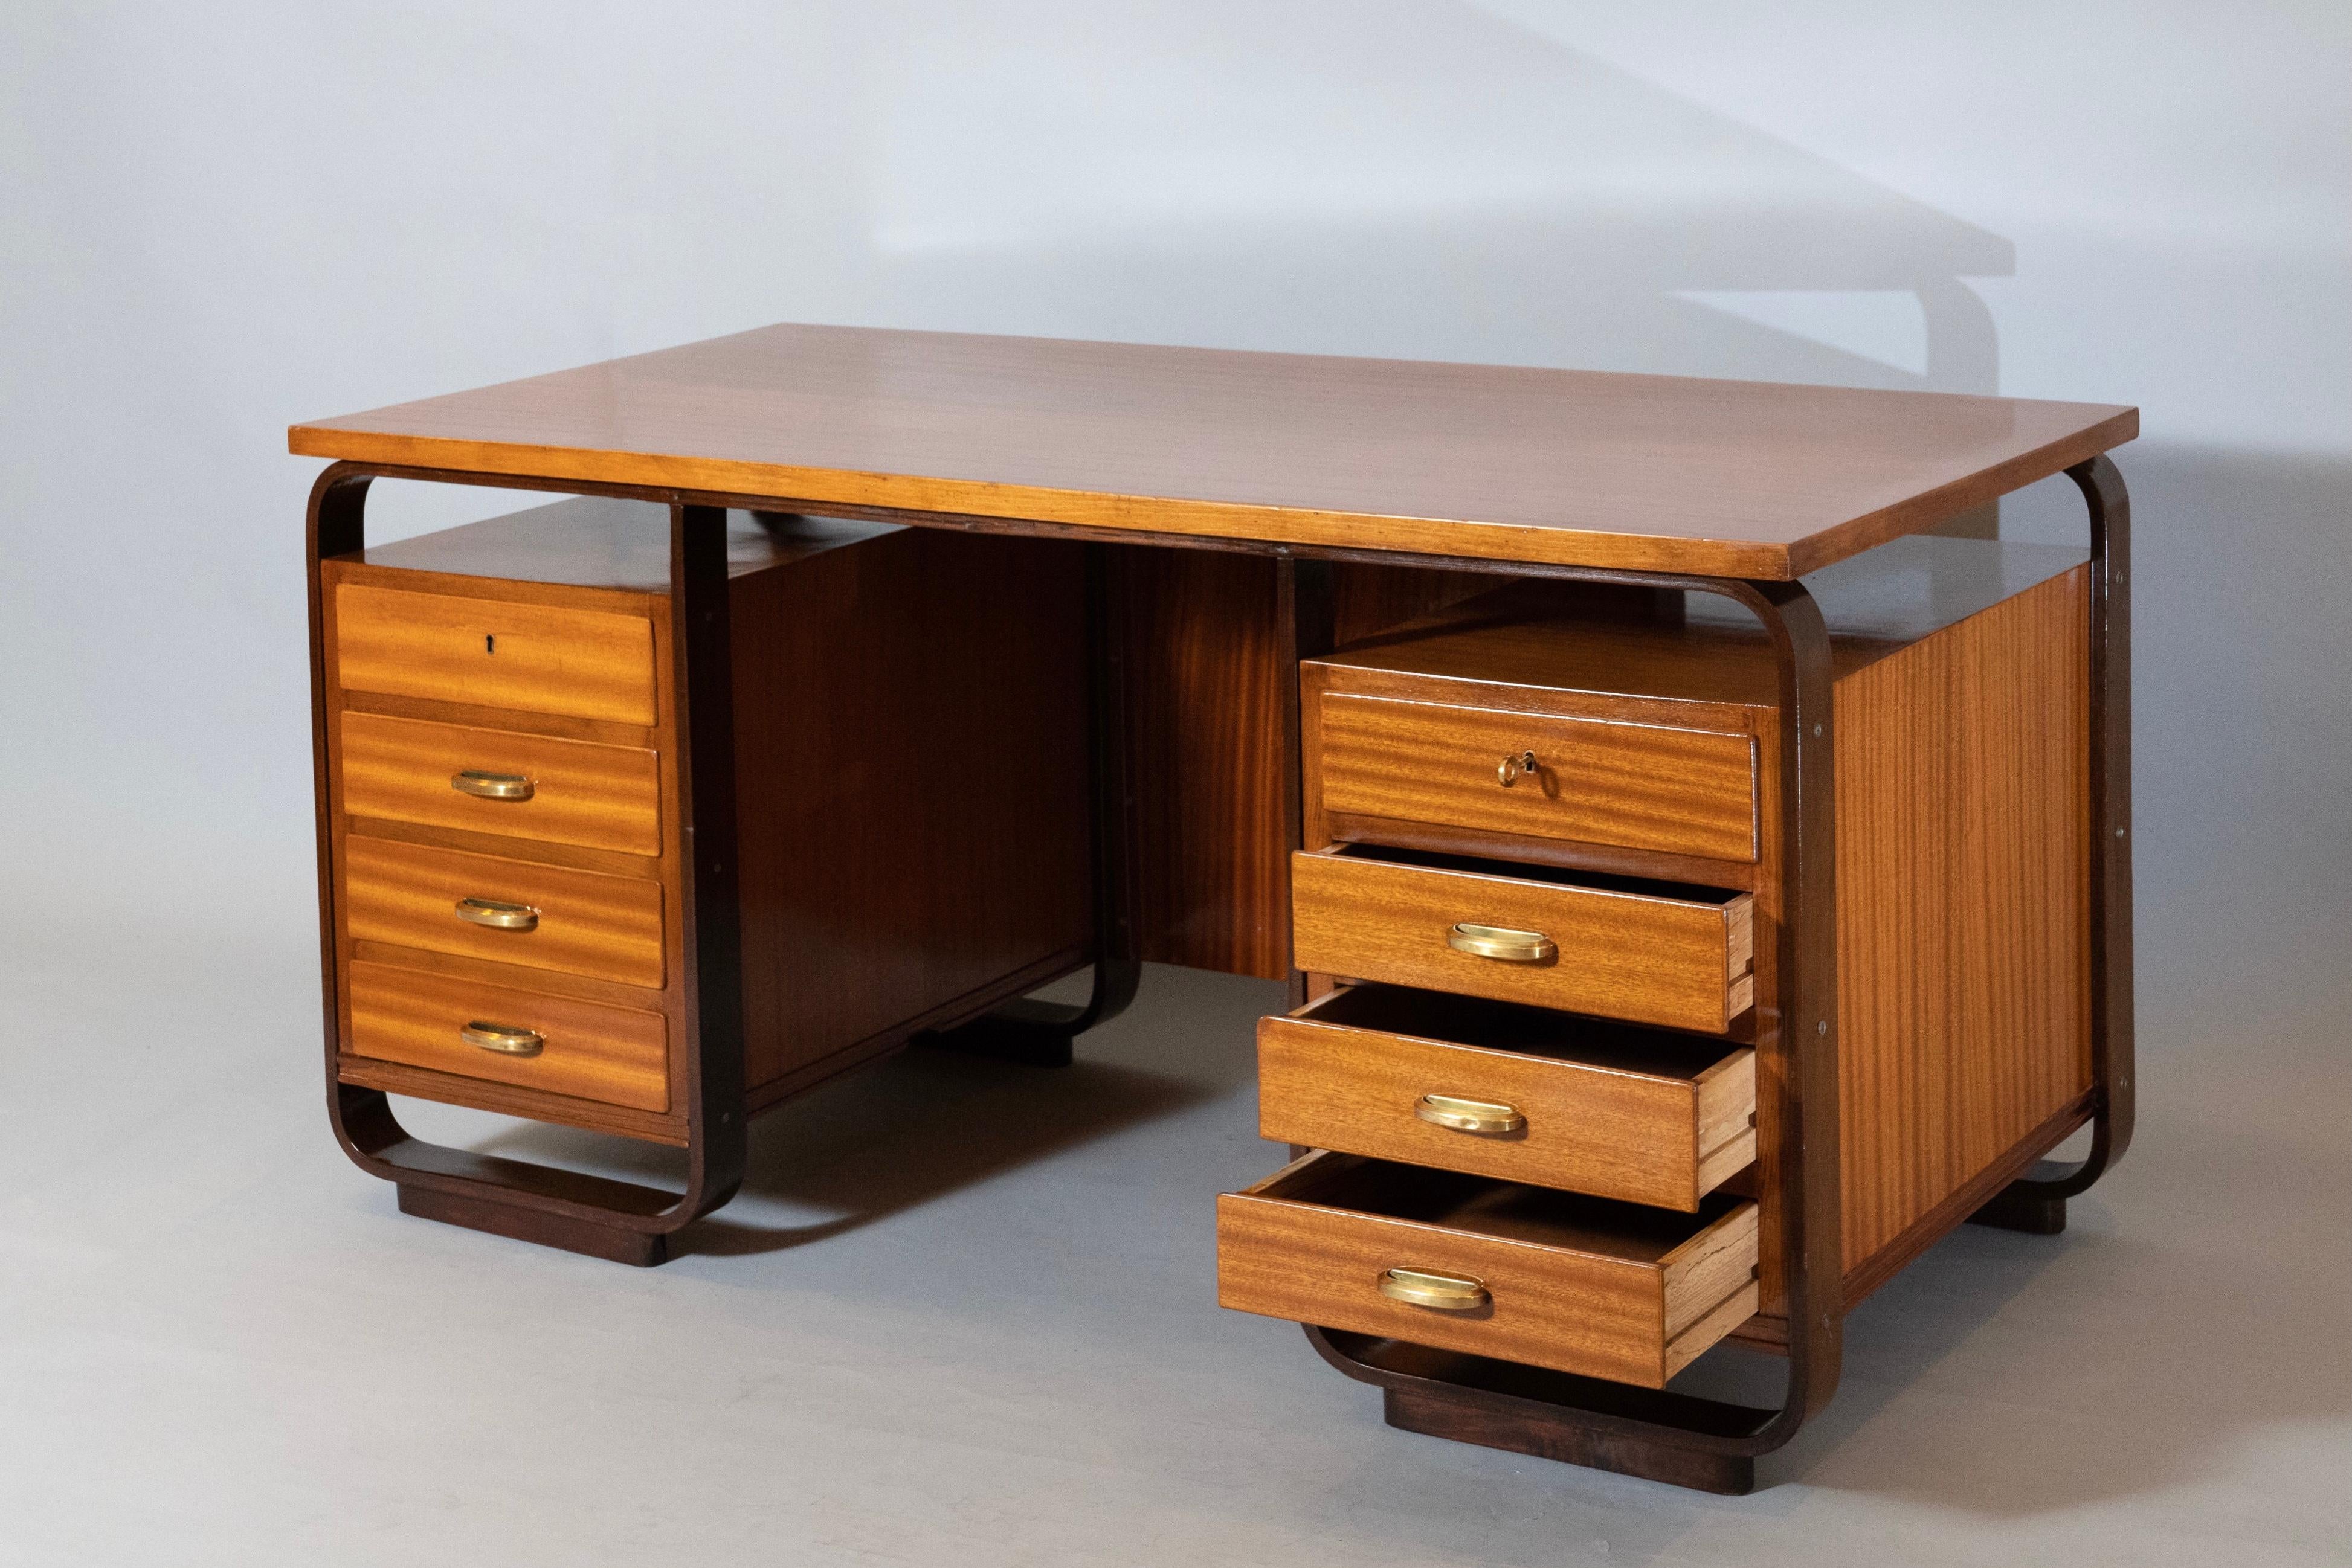 Giuseppe Pagano: Eight Drawer Desk in Fruitwood and Brass, Italy 1940 For Sale 6